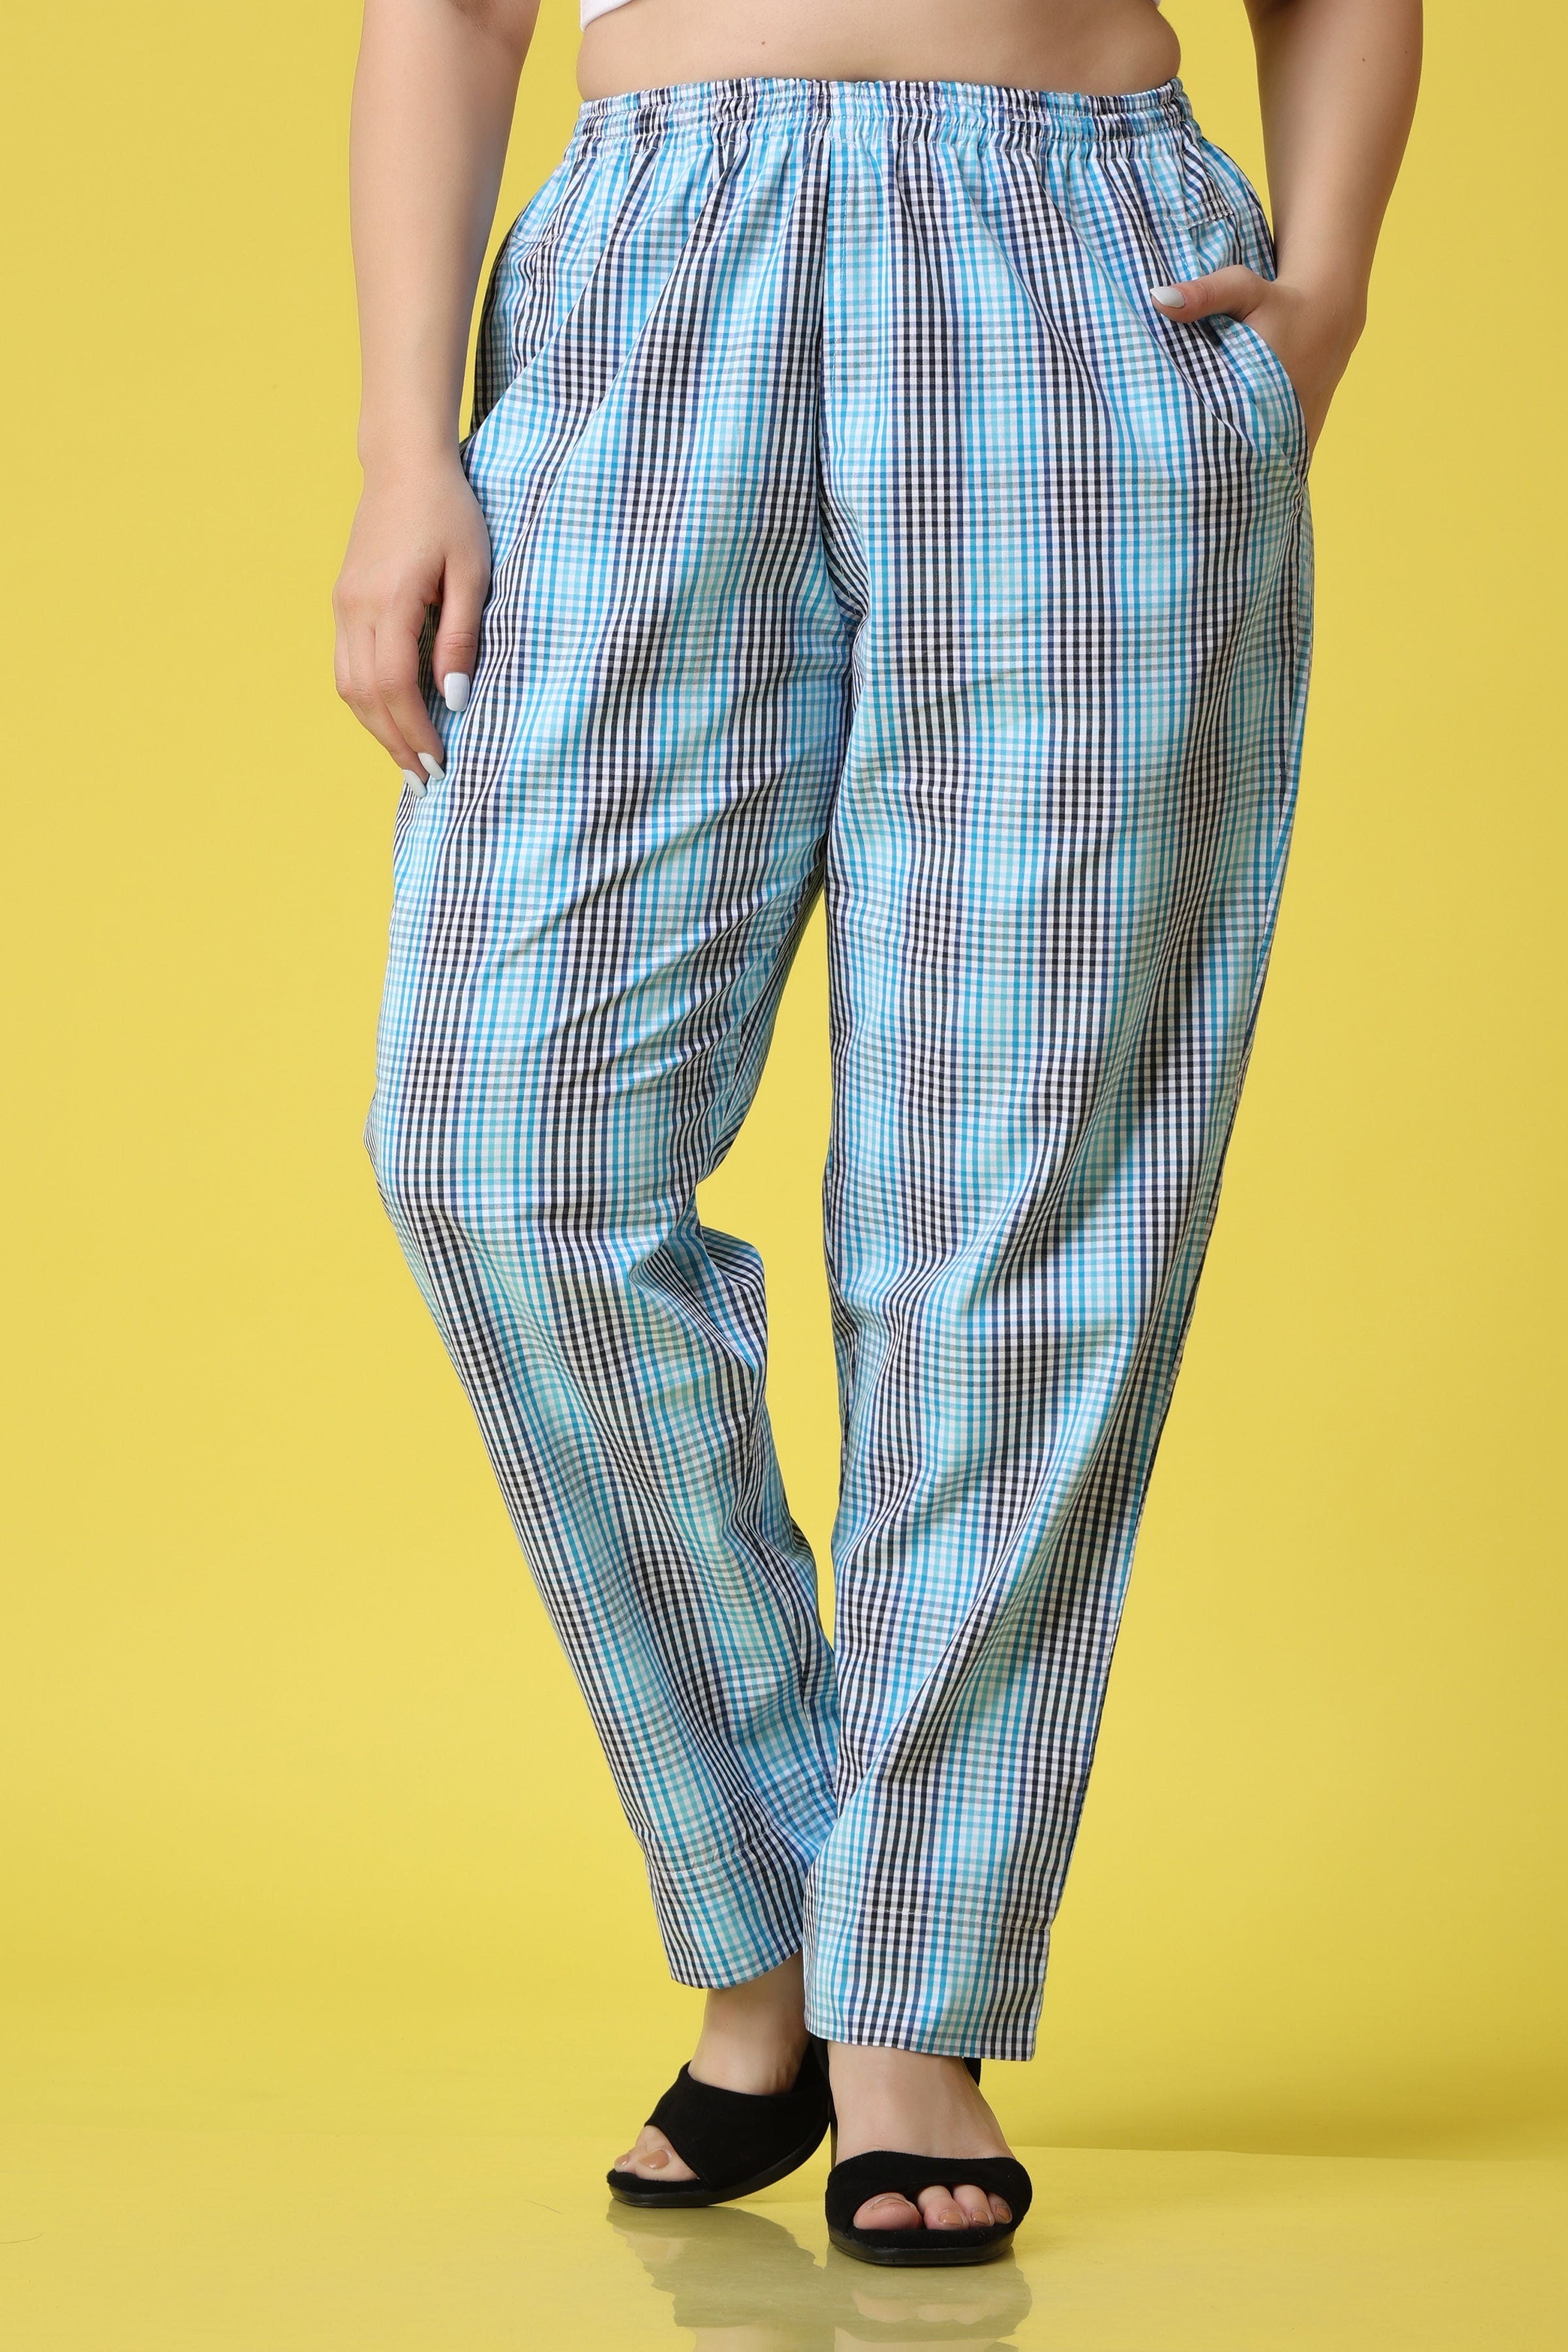 Shop for Printed | Trousers | Womens | online at Lookagain